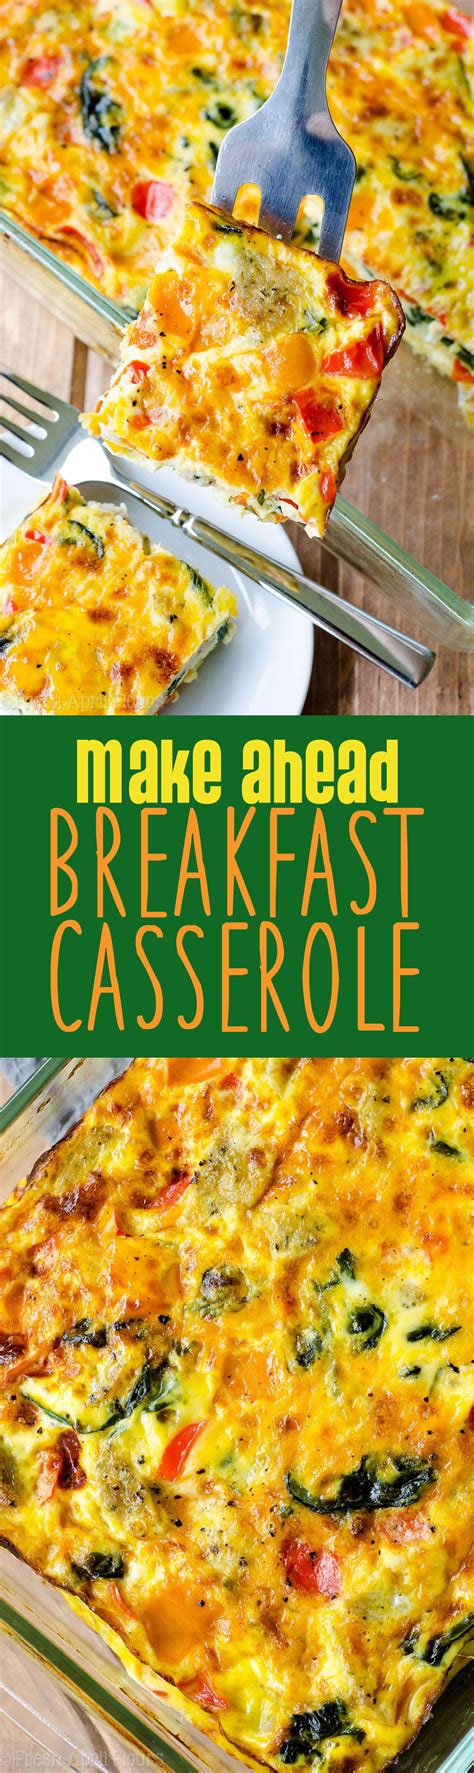 Make Ahead Breakfast Casserole: This sausage, vegetable, and egg casserole can be frozen or made ...